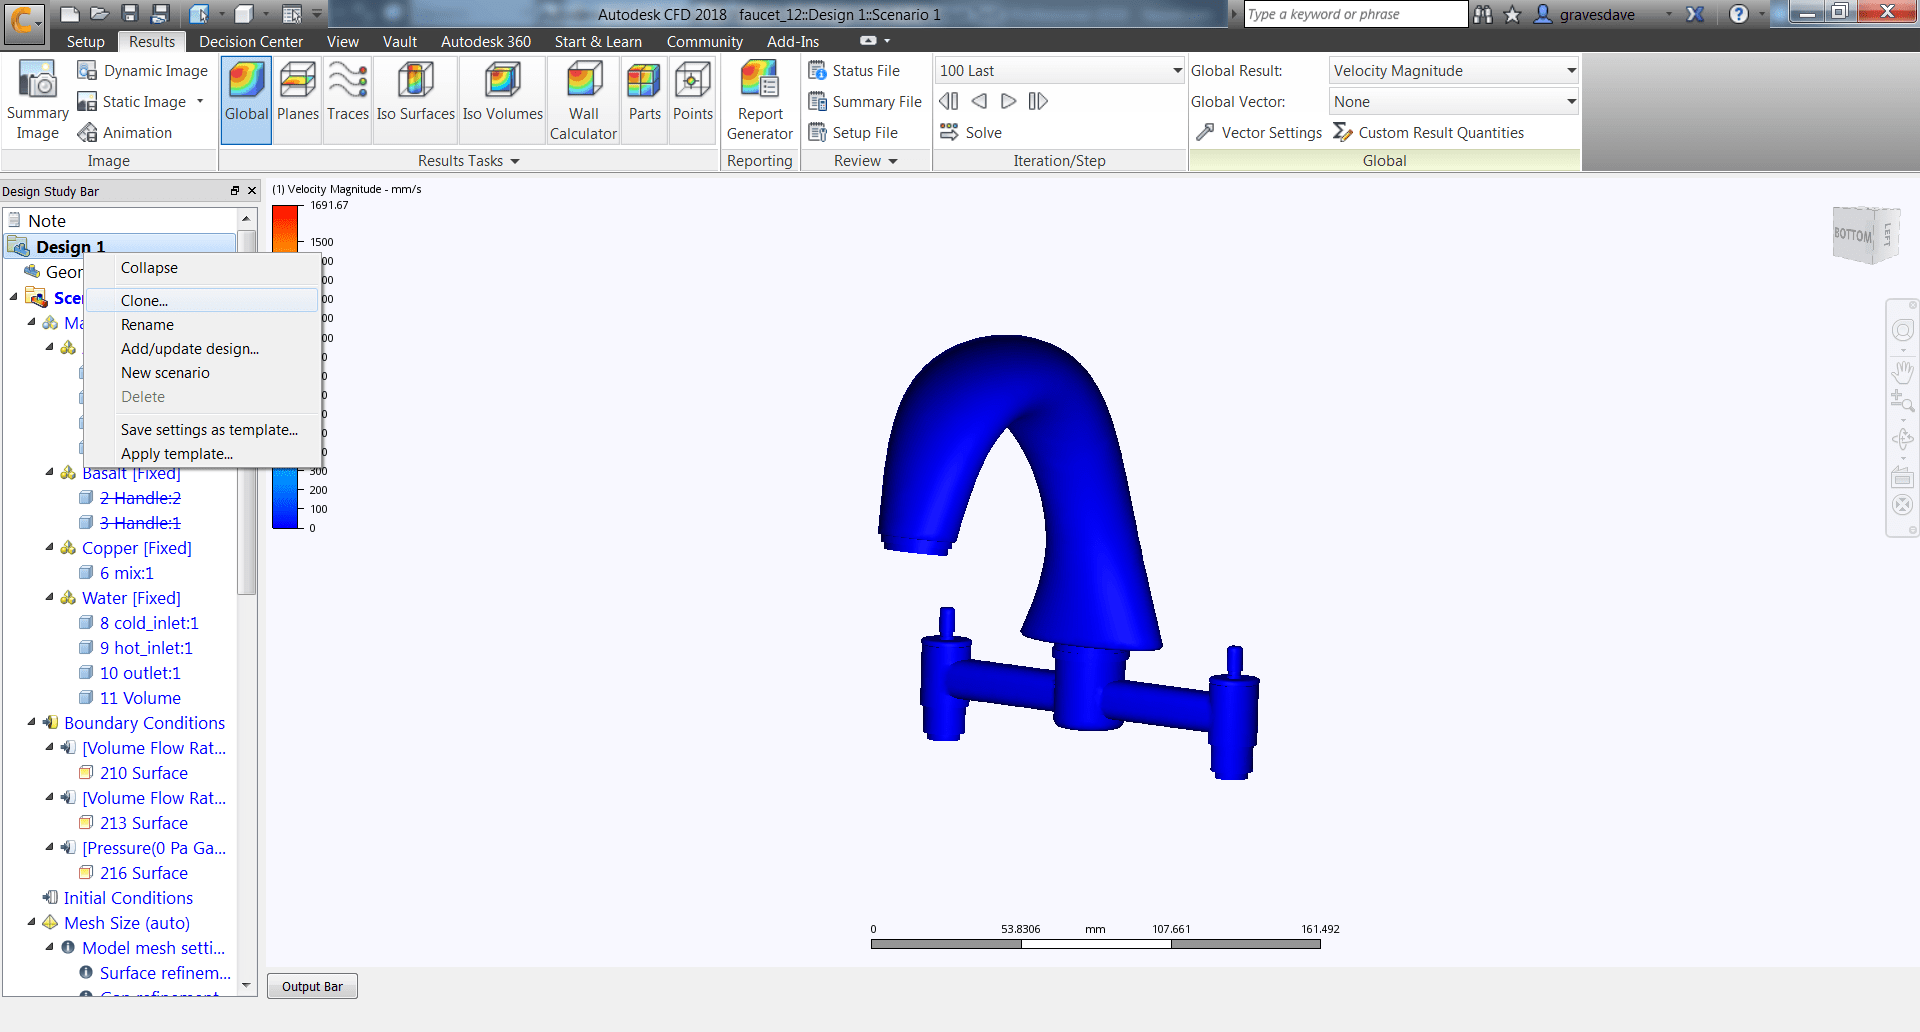 Screenshot of Autodesk CFD showing a rendering of a blue faucet